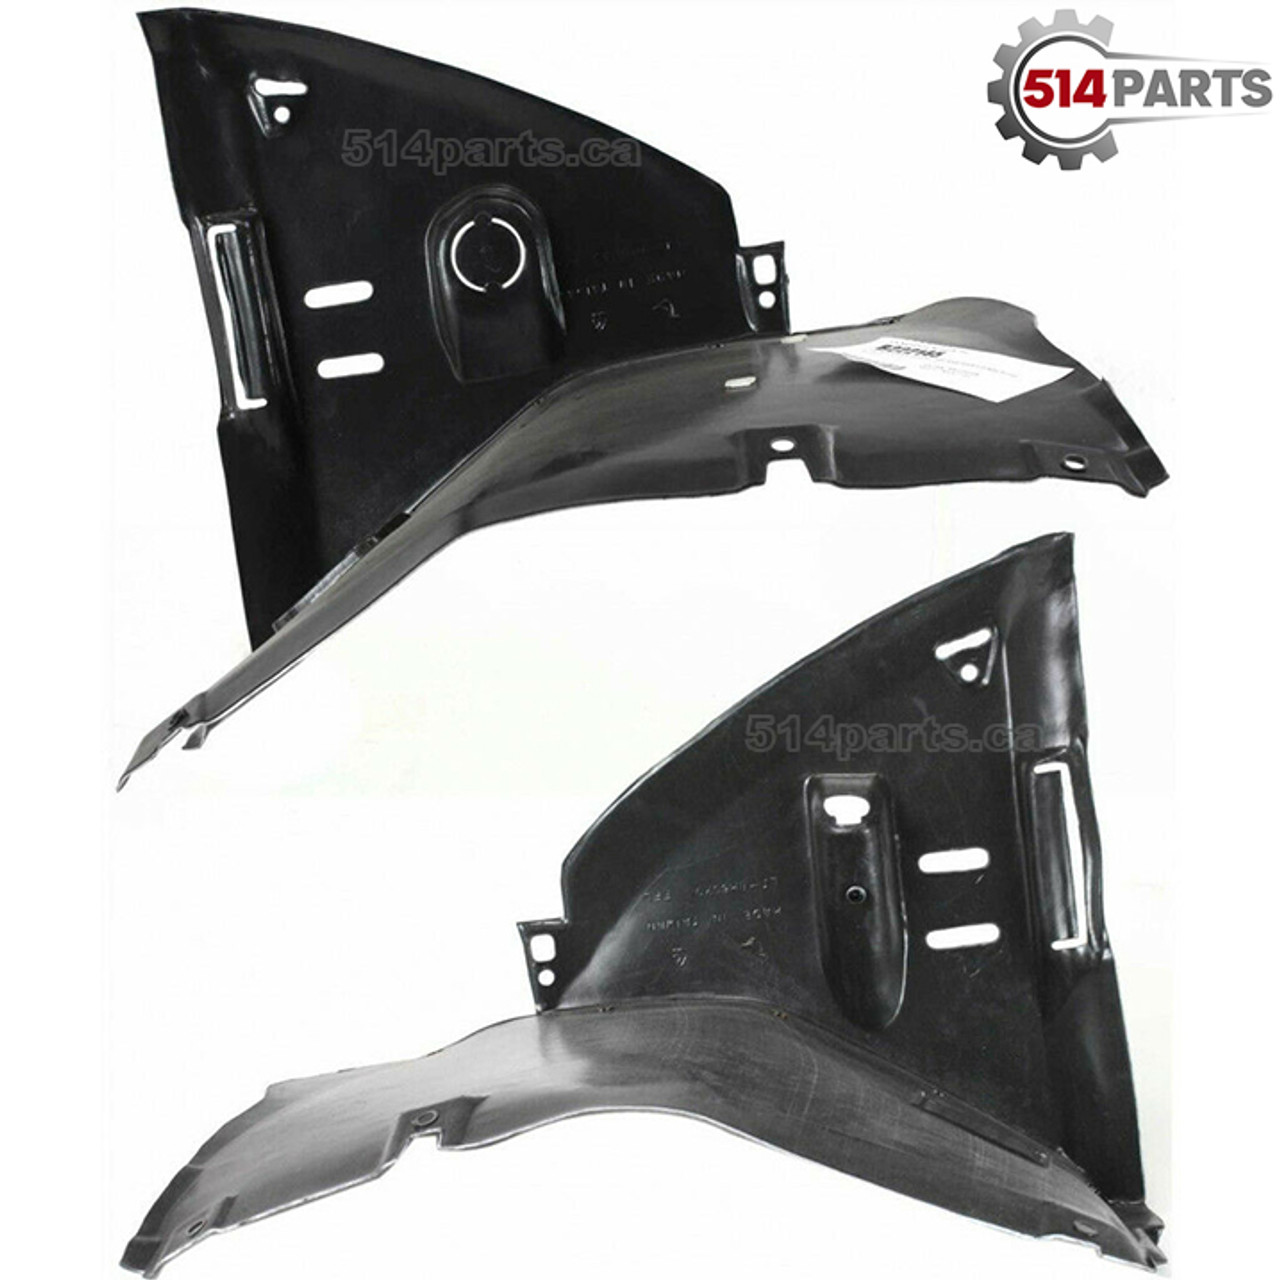 2000 - 2006 BMW 3 SERIES COUPE/CONVERTIBLE FENDER LINER FRONT SECTION - FAUSSE AILE SECTION AVANT